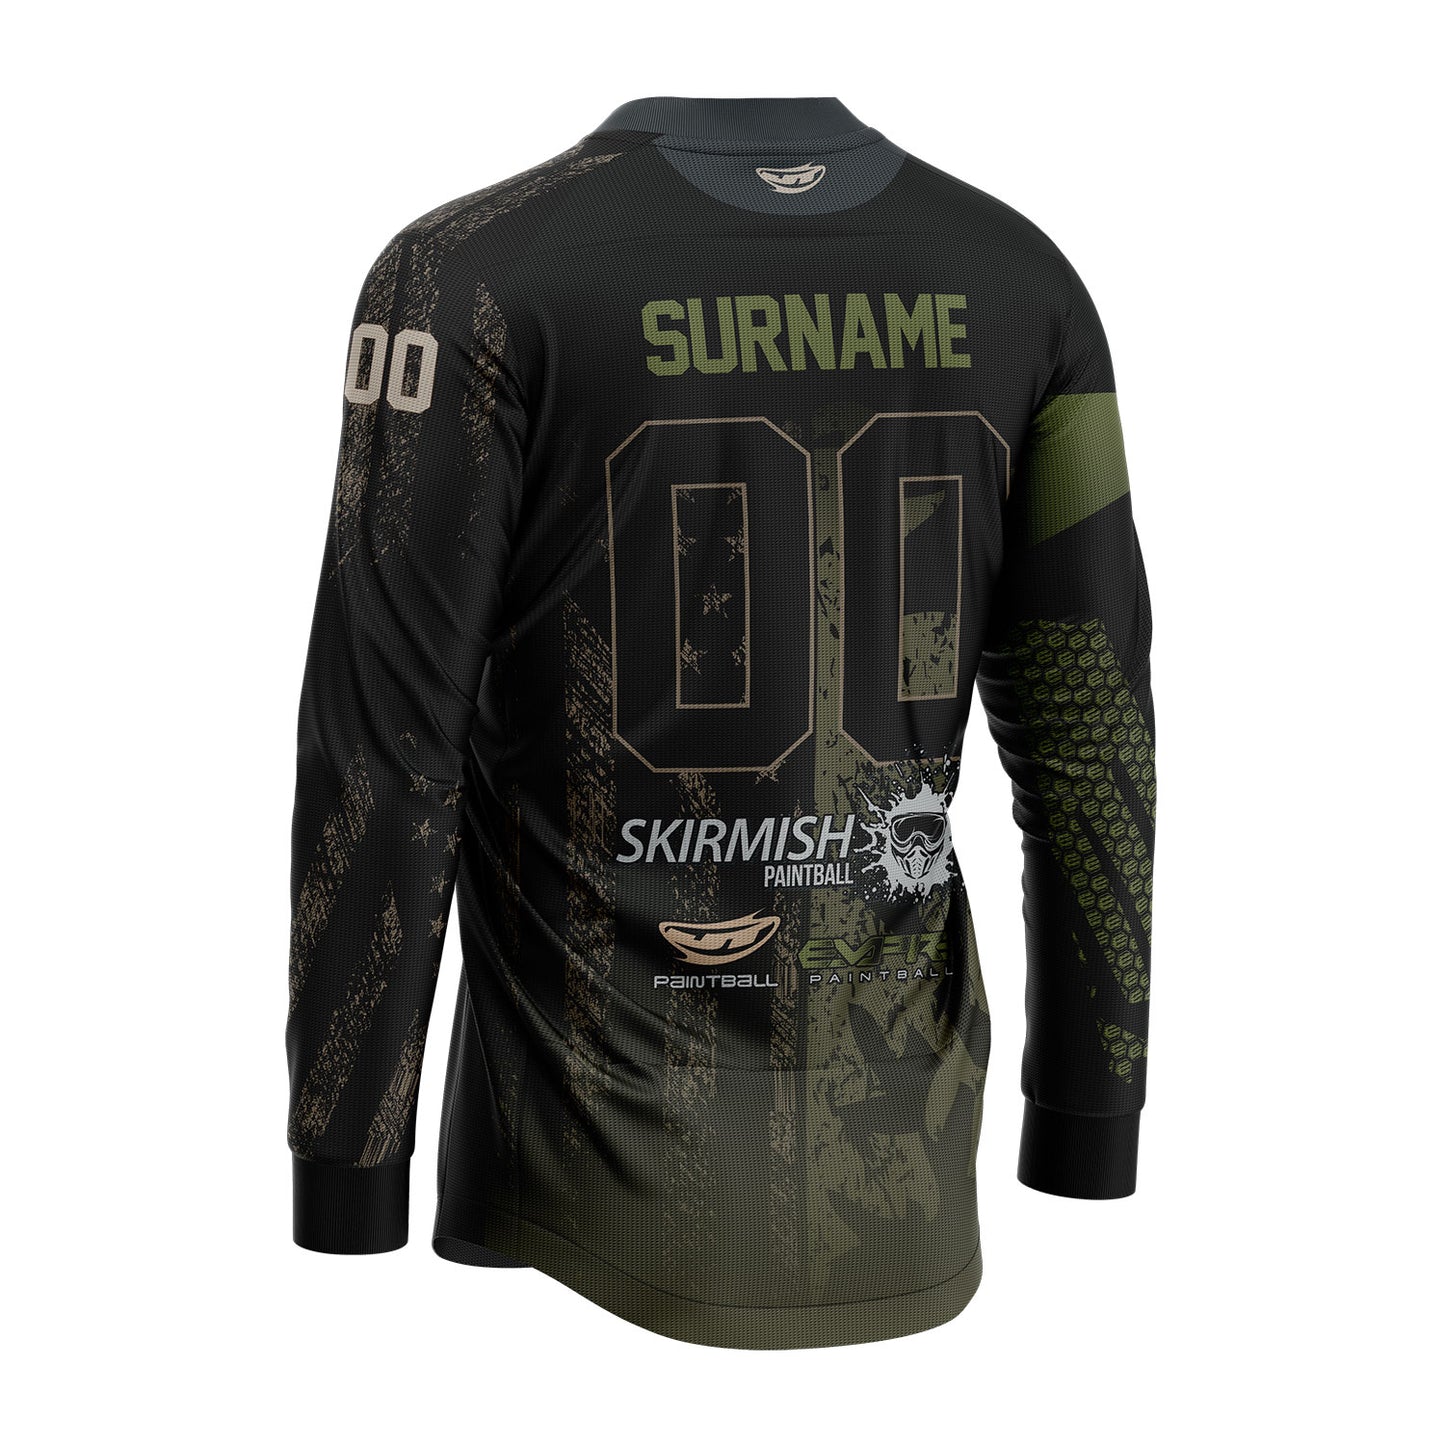 Skirmish ION Odyssey Jersey - limited time